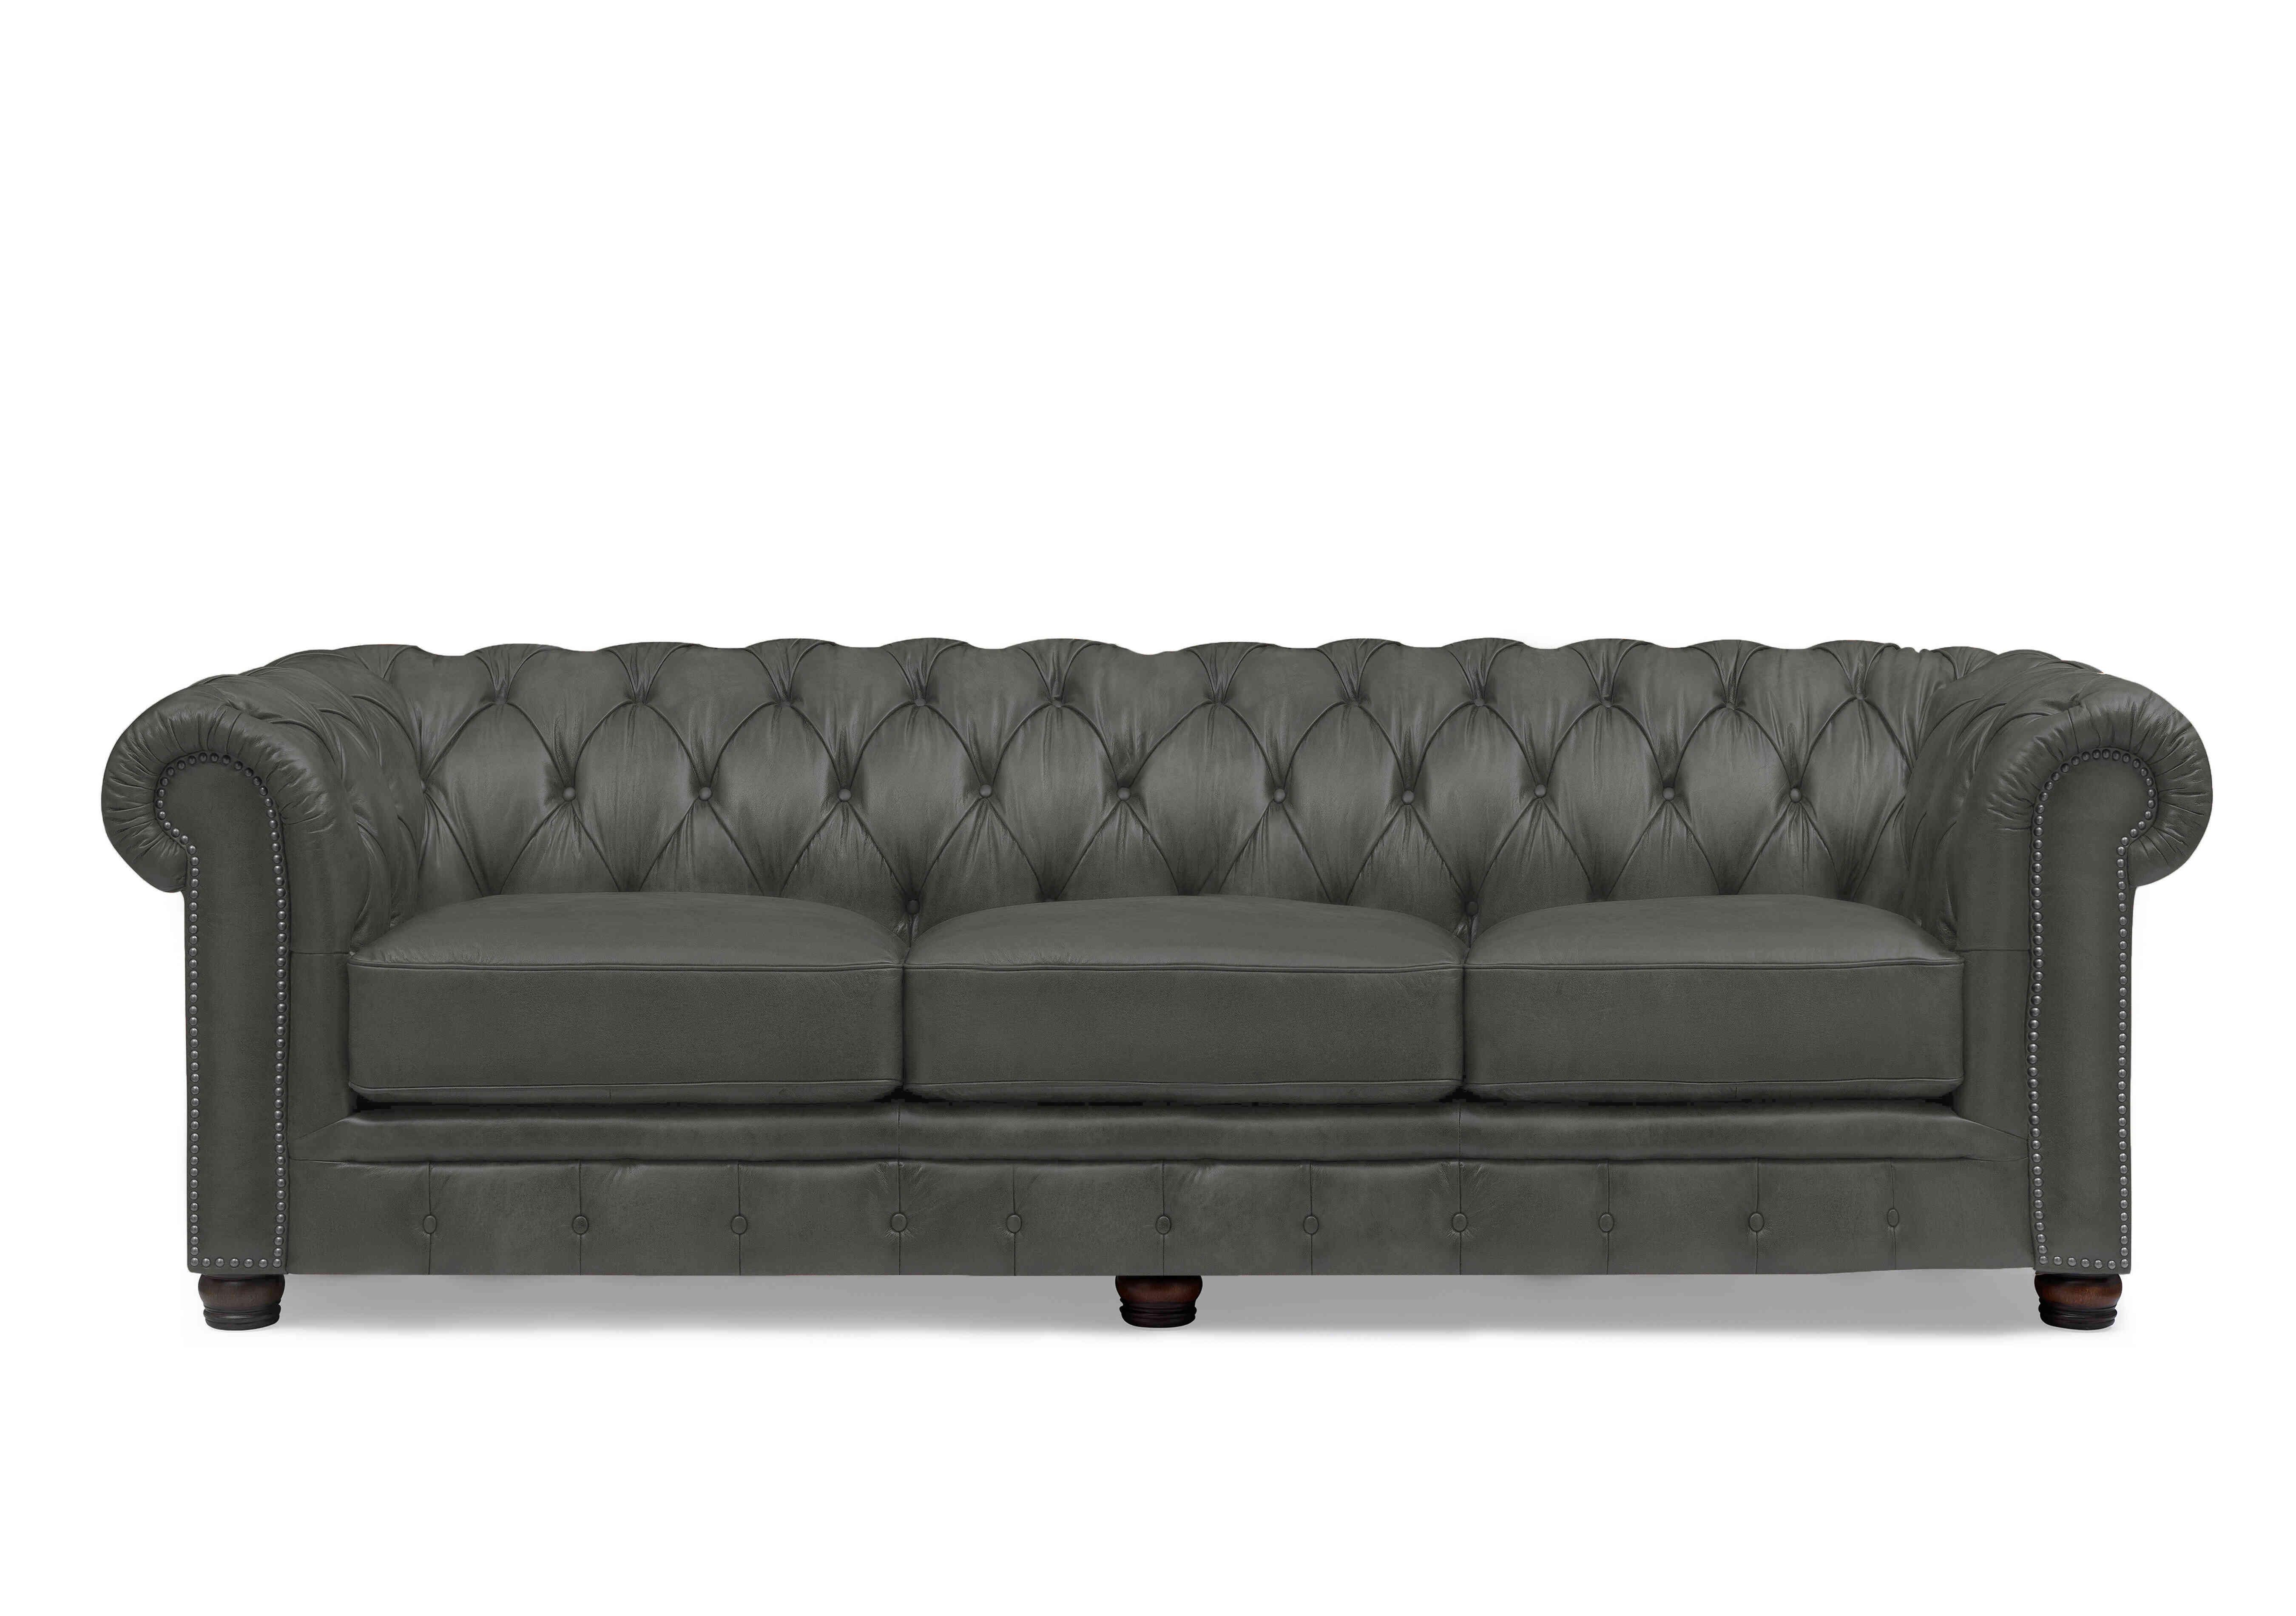 Shackleton 4 Seater Leather Chesterfield Sofa in X3y2-1966ls Granite on Furniture Village